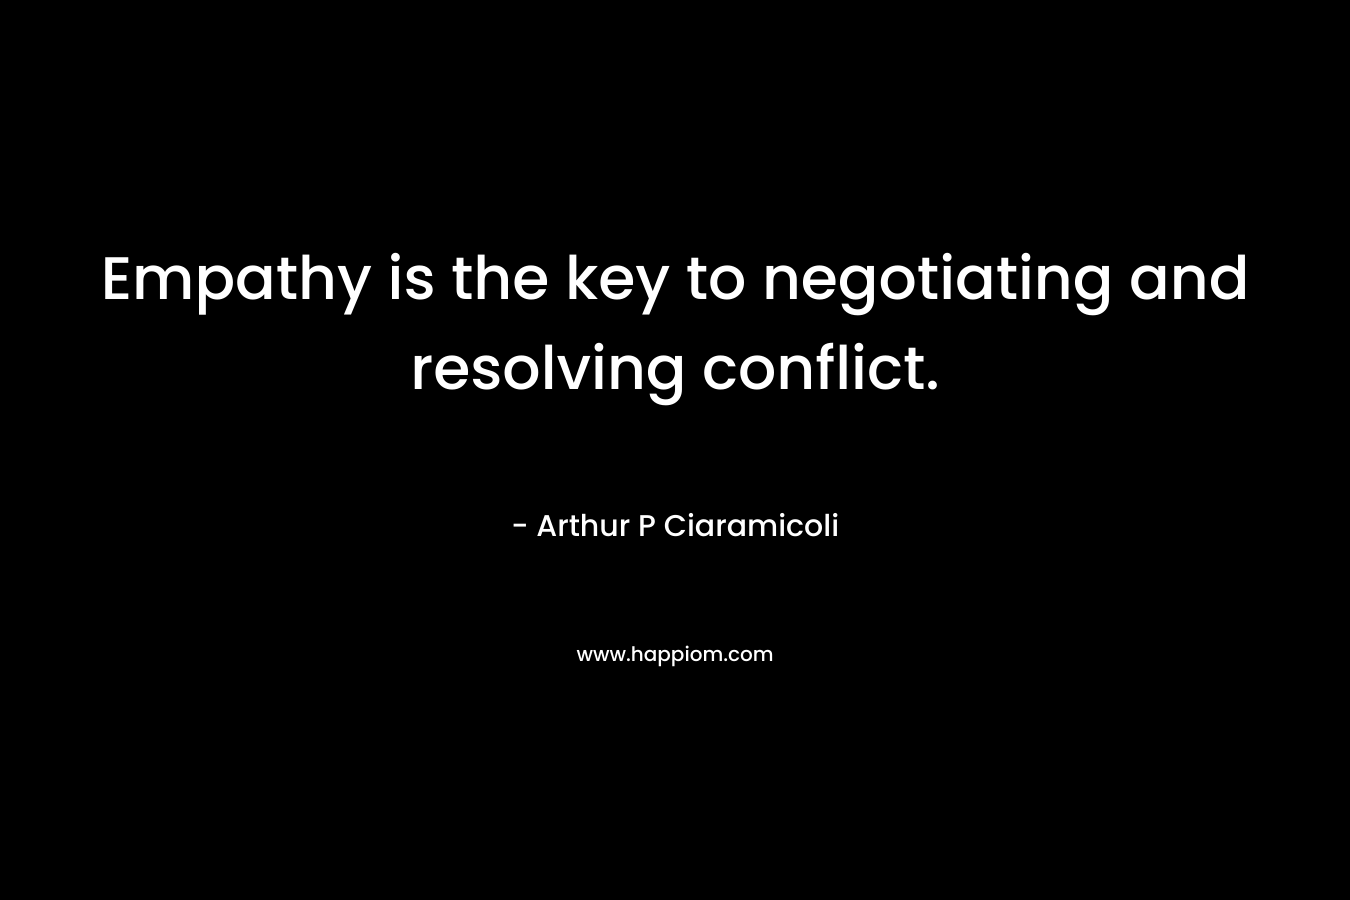 Empathy is the key to negotiating and resolving conflict.